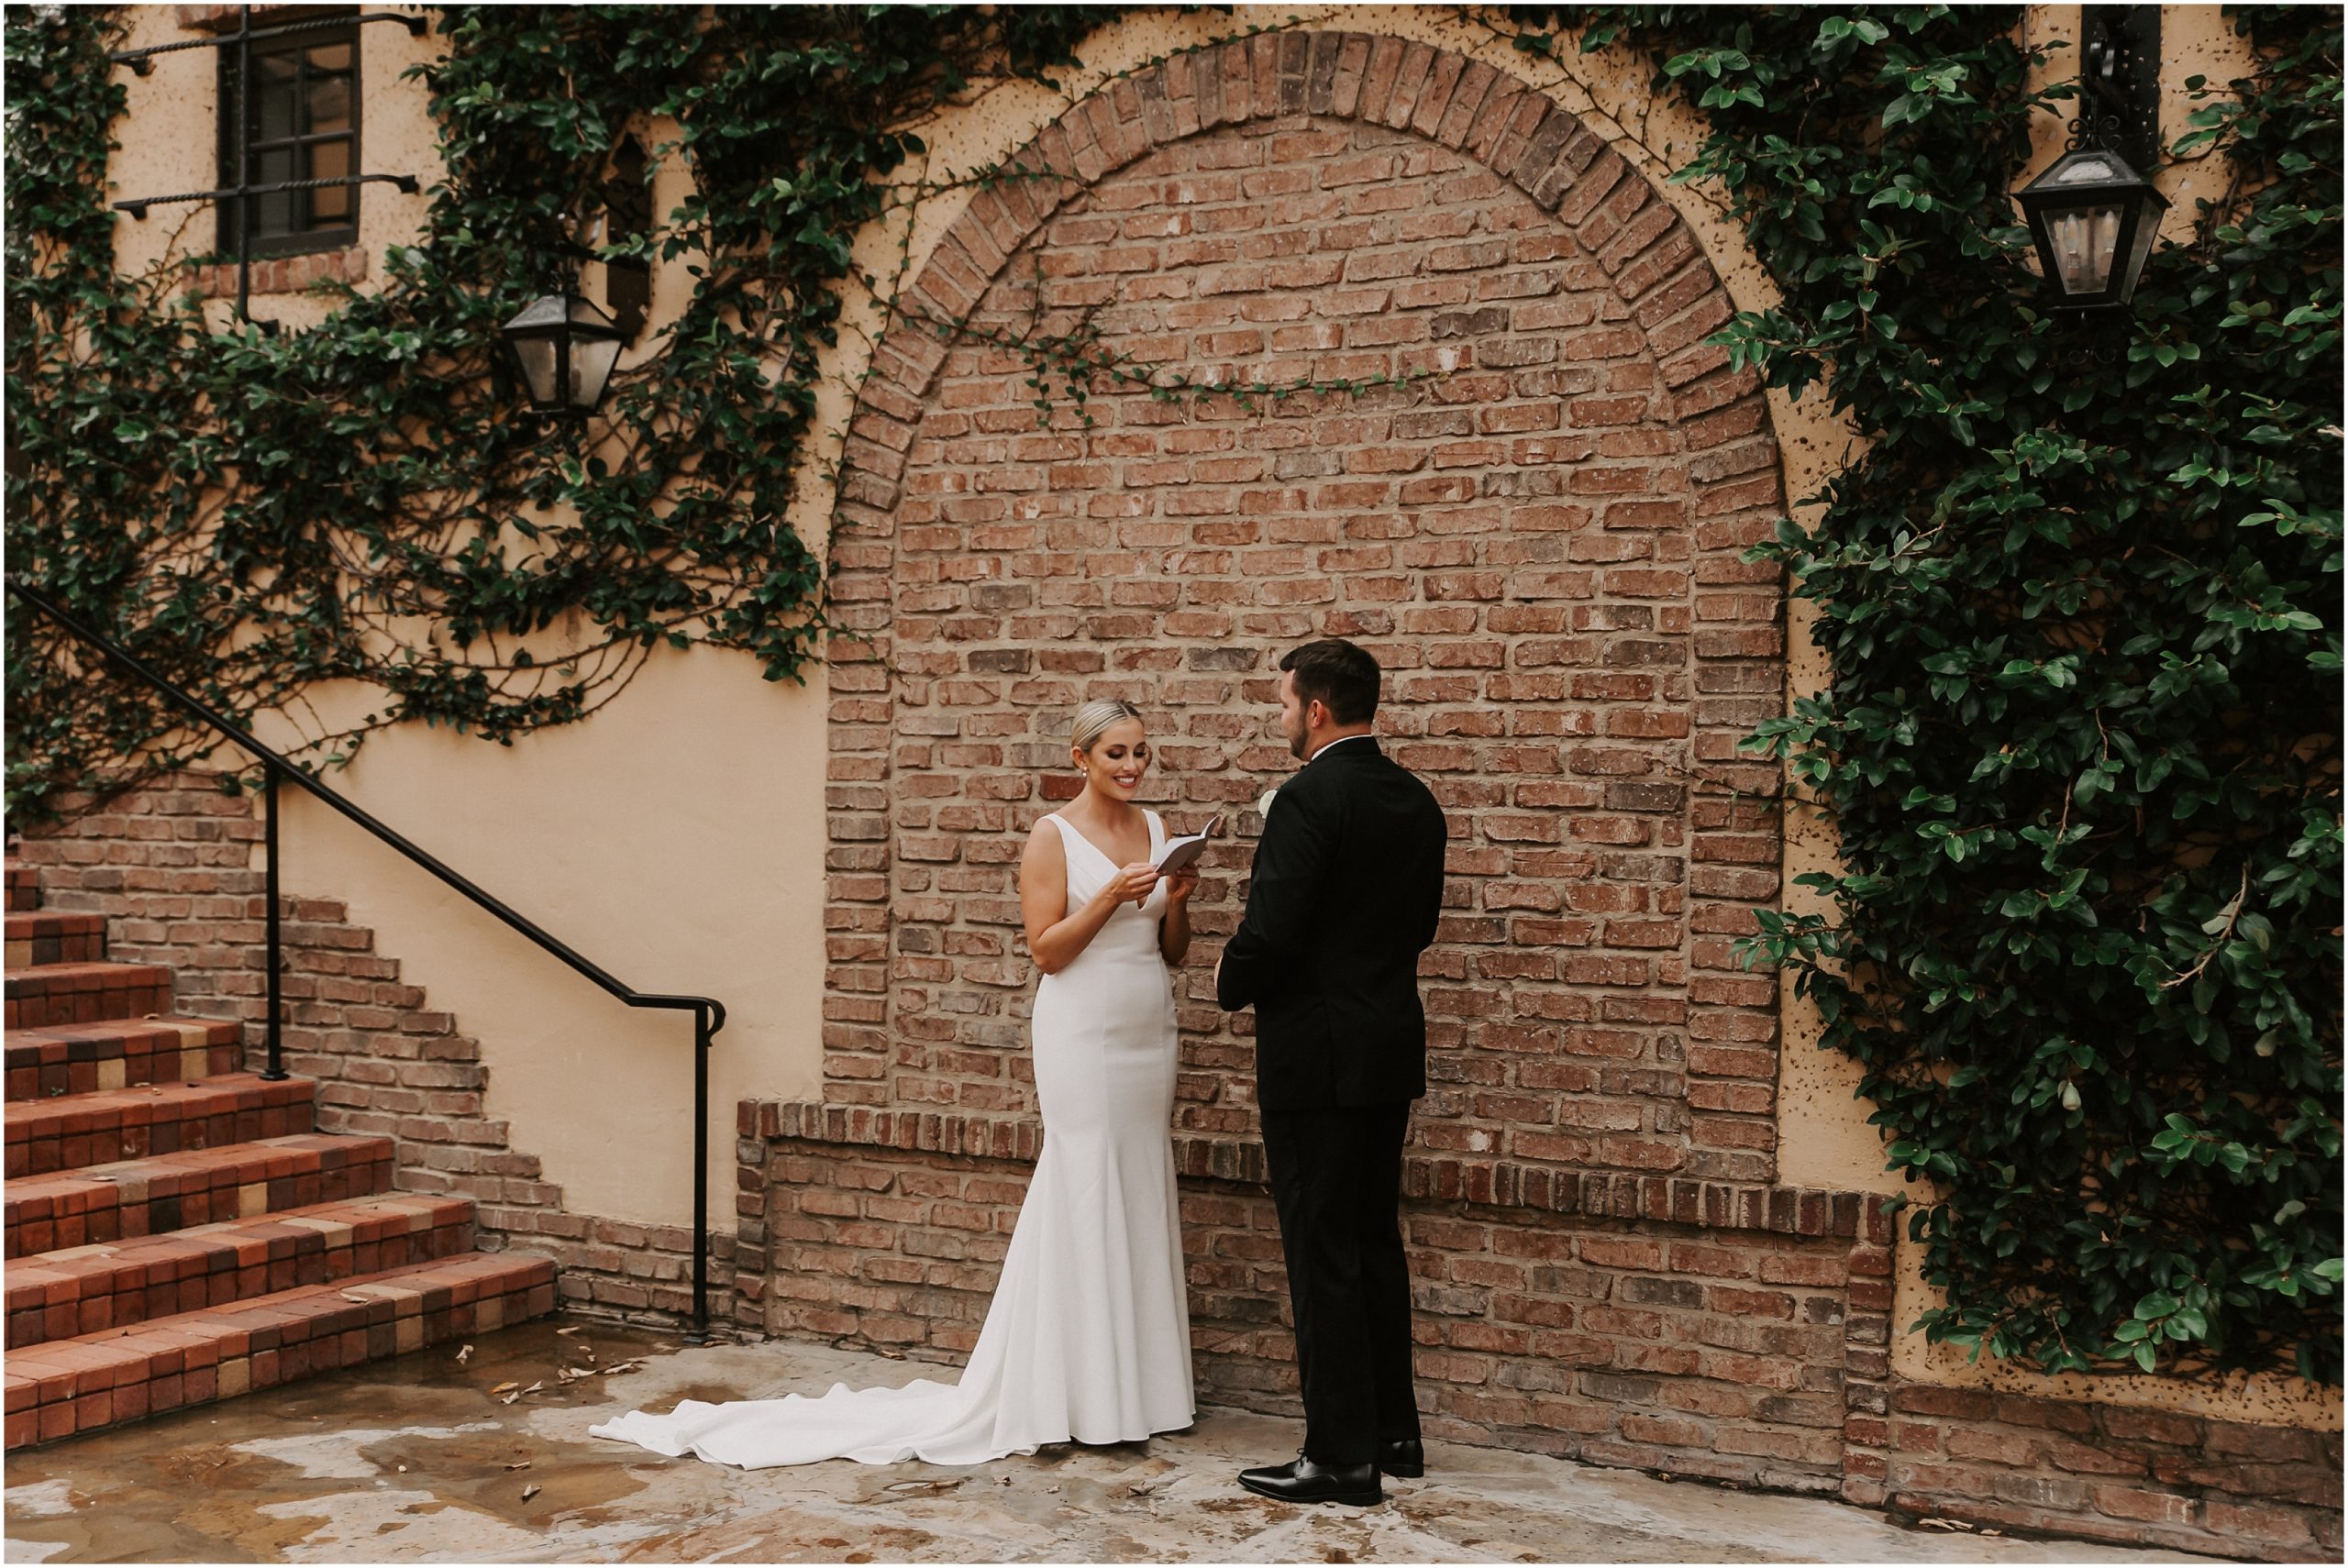 We truly recommend to enjoy this lovely newer but popular elegant and timeless wedding day tradition as a private little time to connect,  reflect or even why not read your vows? just the two of you away from the eyes of family and friends. 